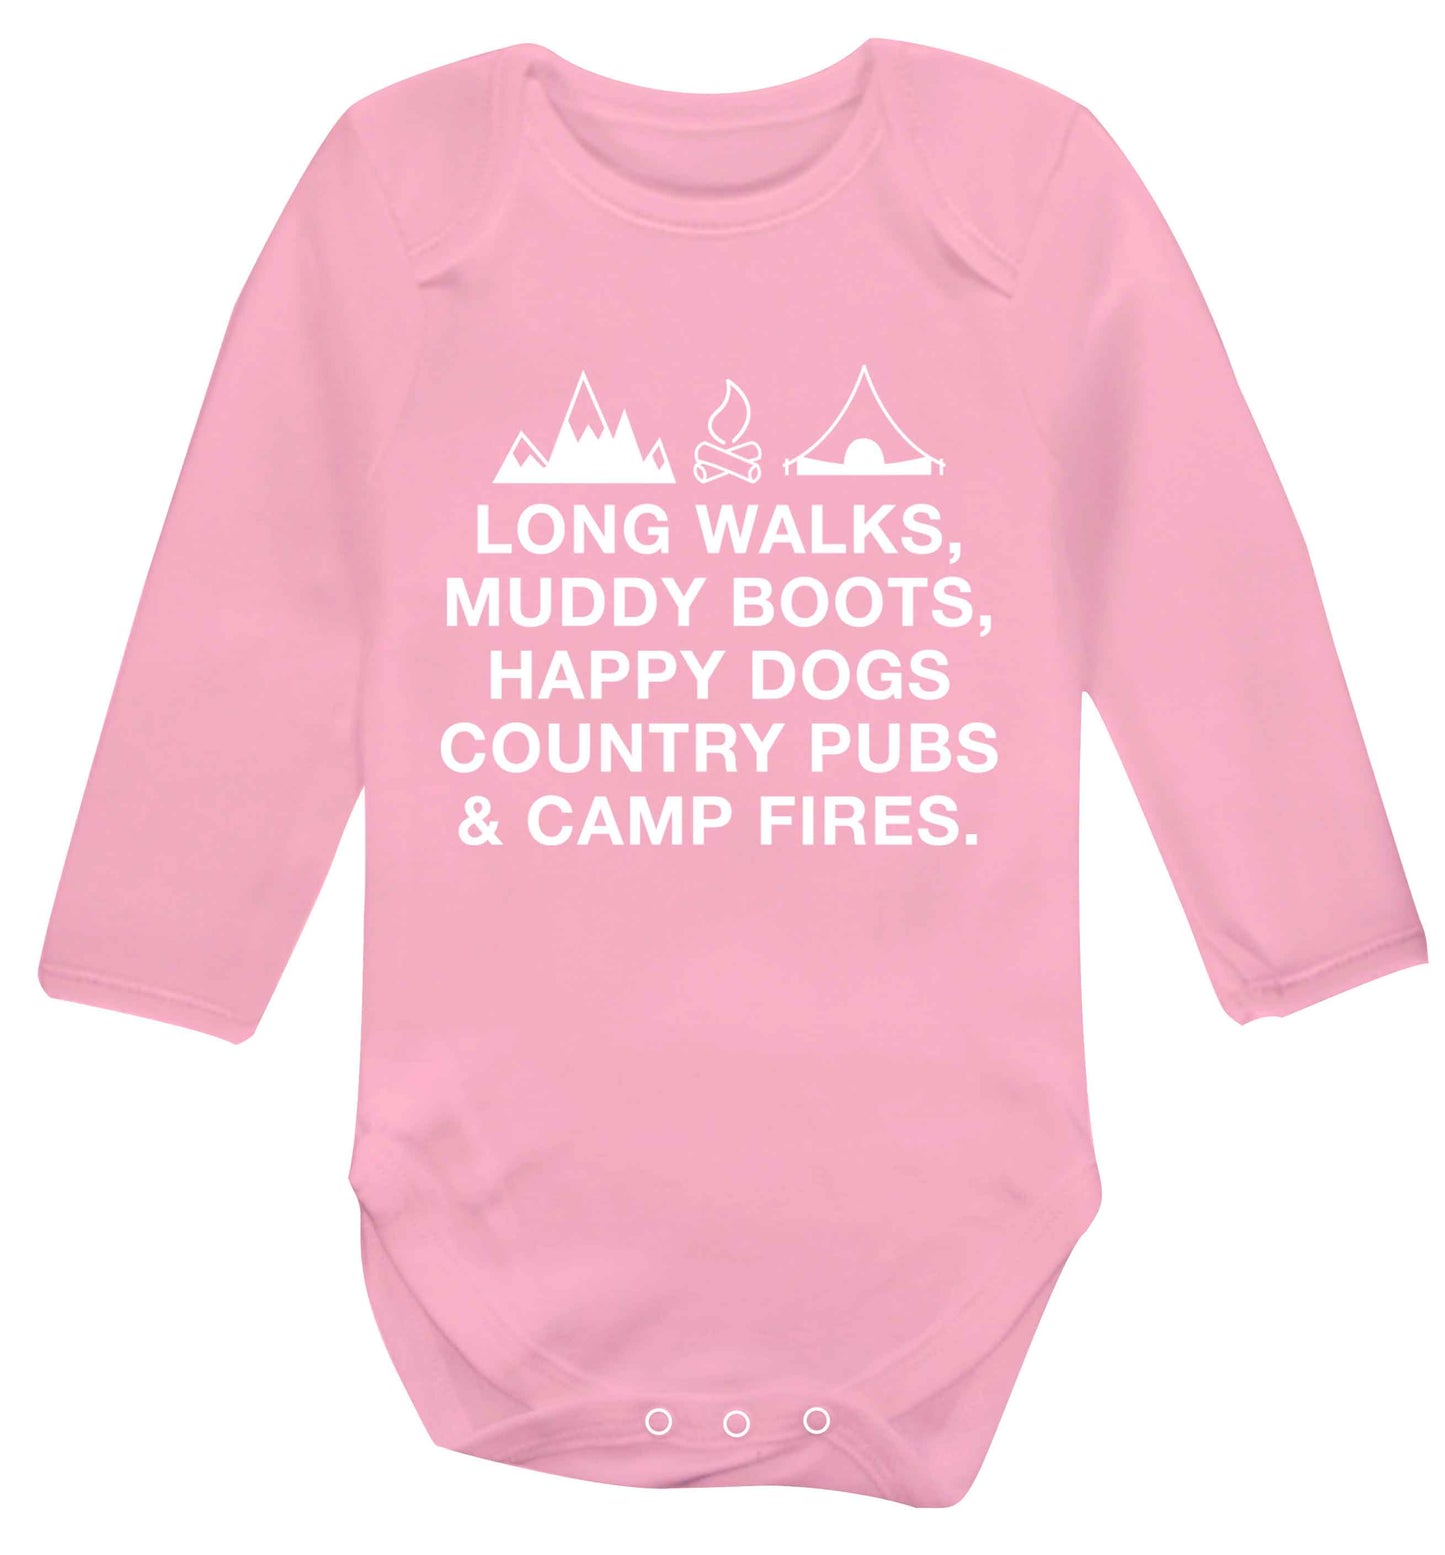 Long walks muddy boots happy dogs country pubs and camp fires Baby Vest long sleeved pale pink 6-12 months